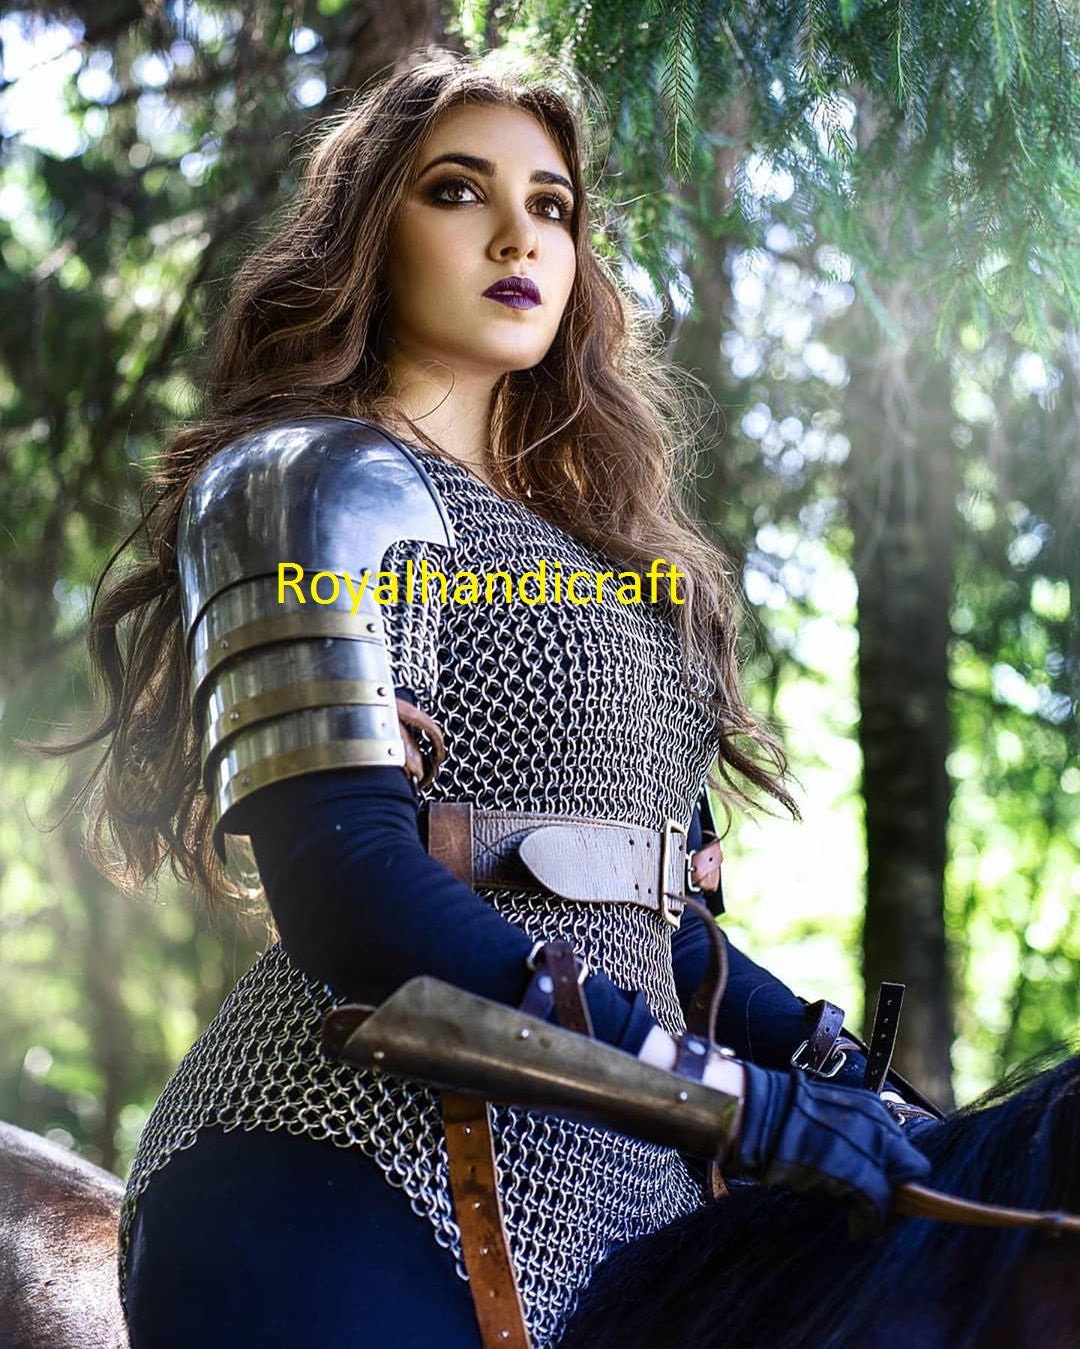 Medieval Woman Lady Armor With Completefemale Armor, Female Knight